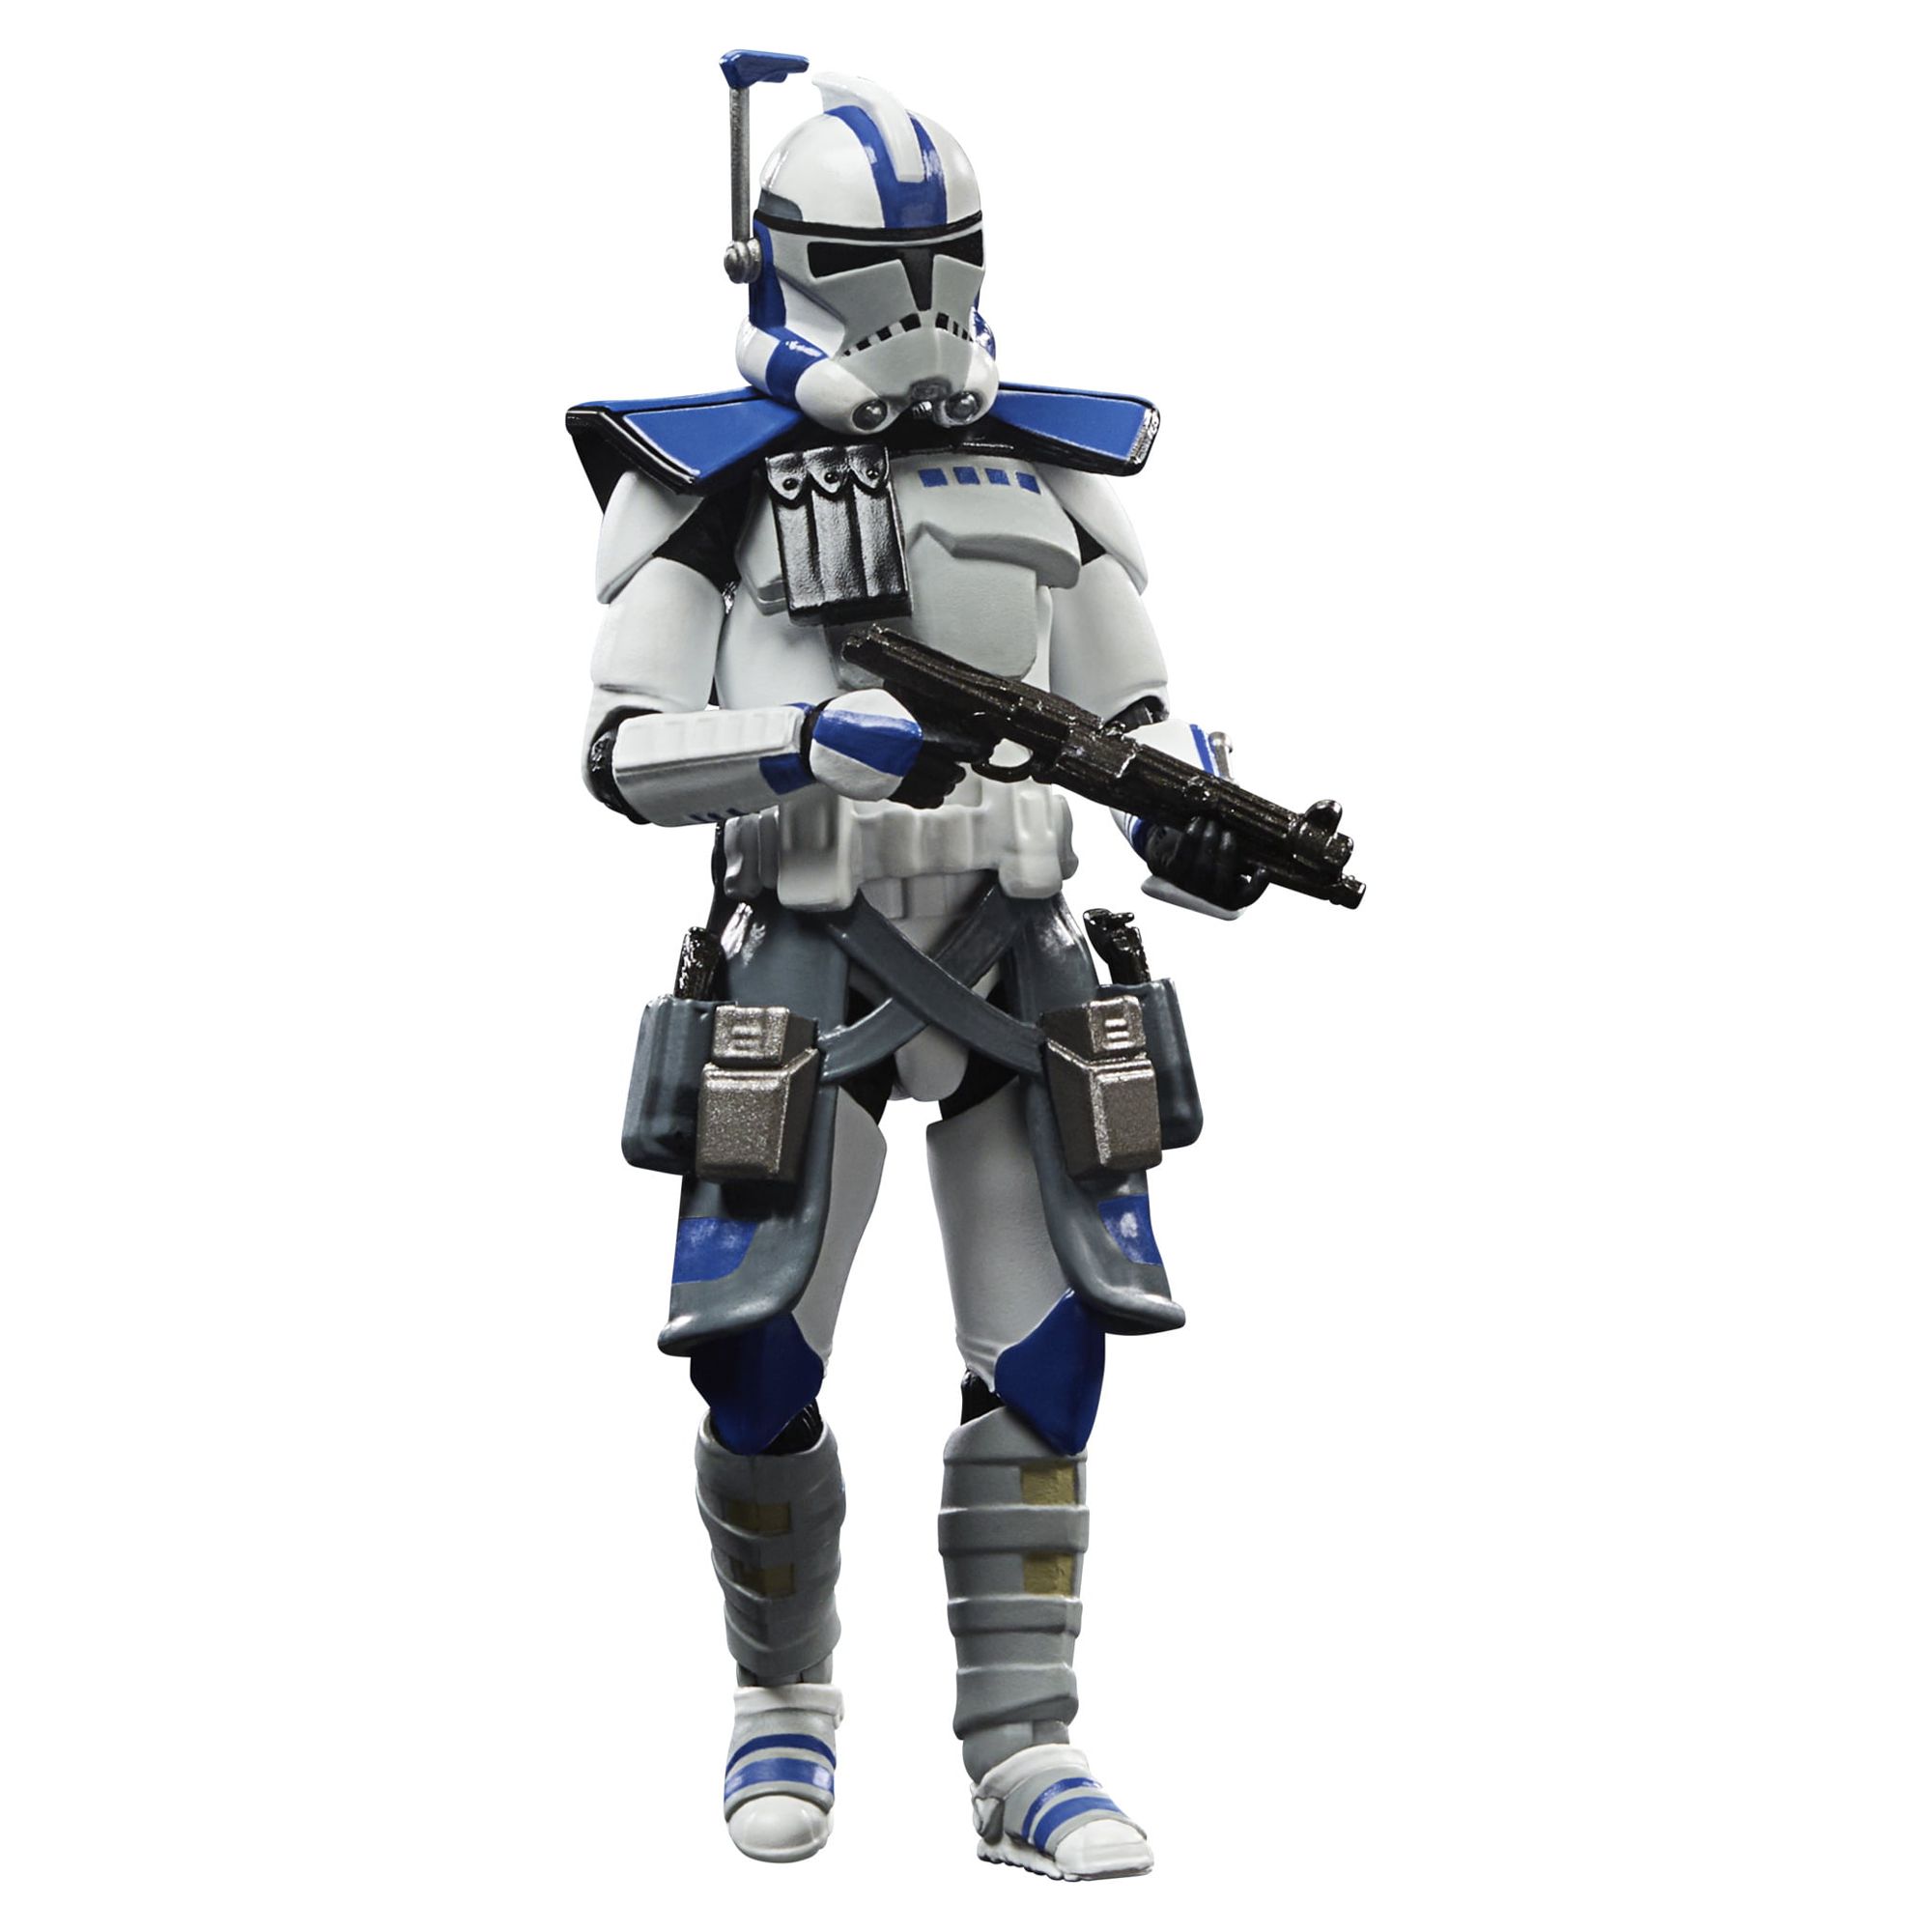 Star Wars: The Clone Wars The Vintage Collection ARC Commander Havoc Kids Toy Action Figure for Boys and Girls Ages 4 5 6 7 8 and Up (3.75”) - image 1 of 10